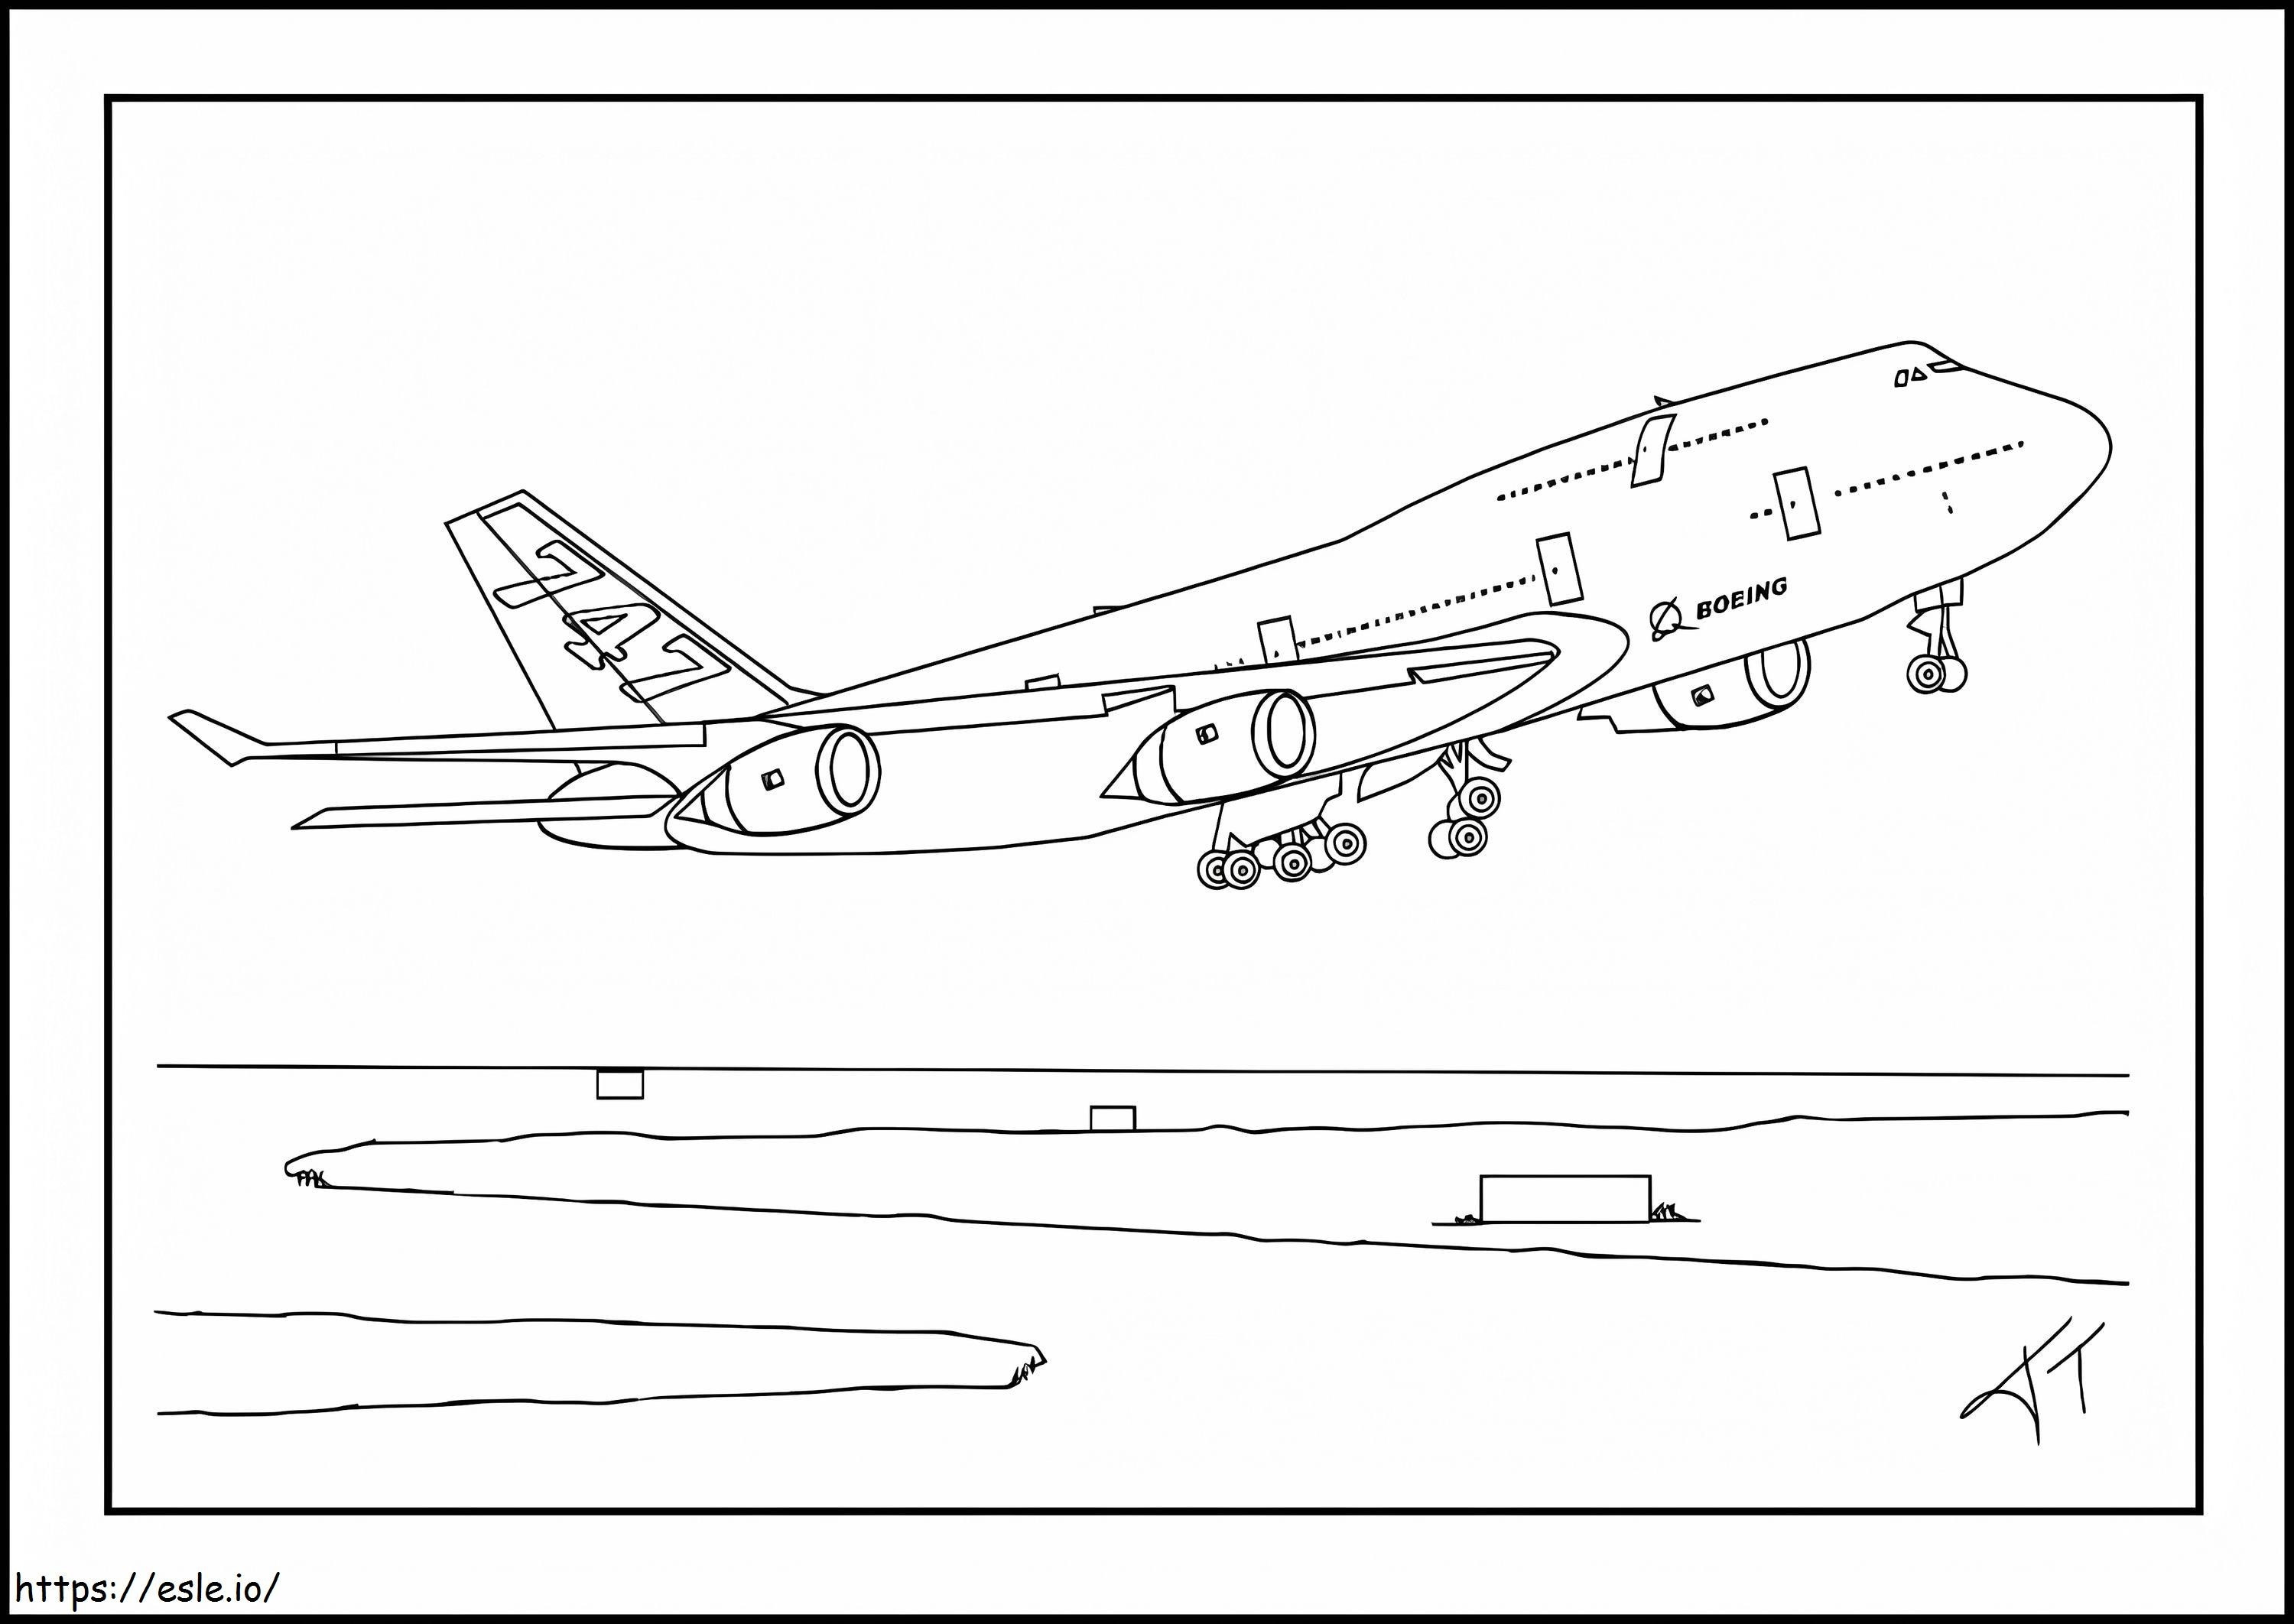 Boeing Airplane Ready To Fly coloring page